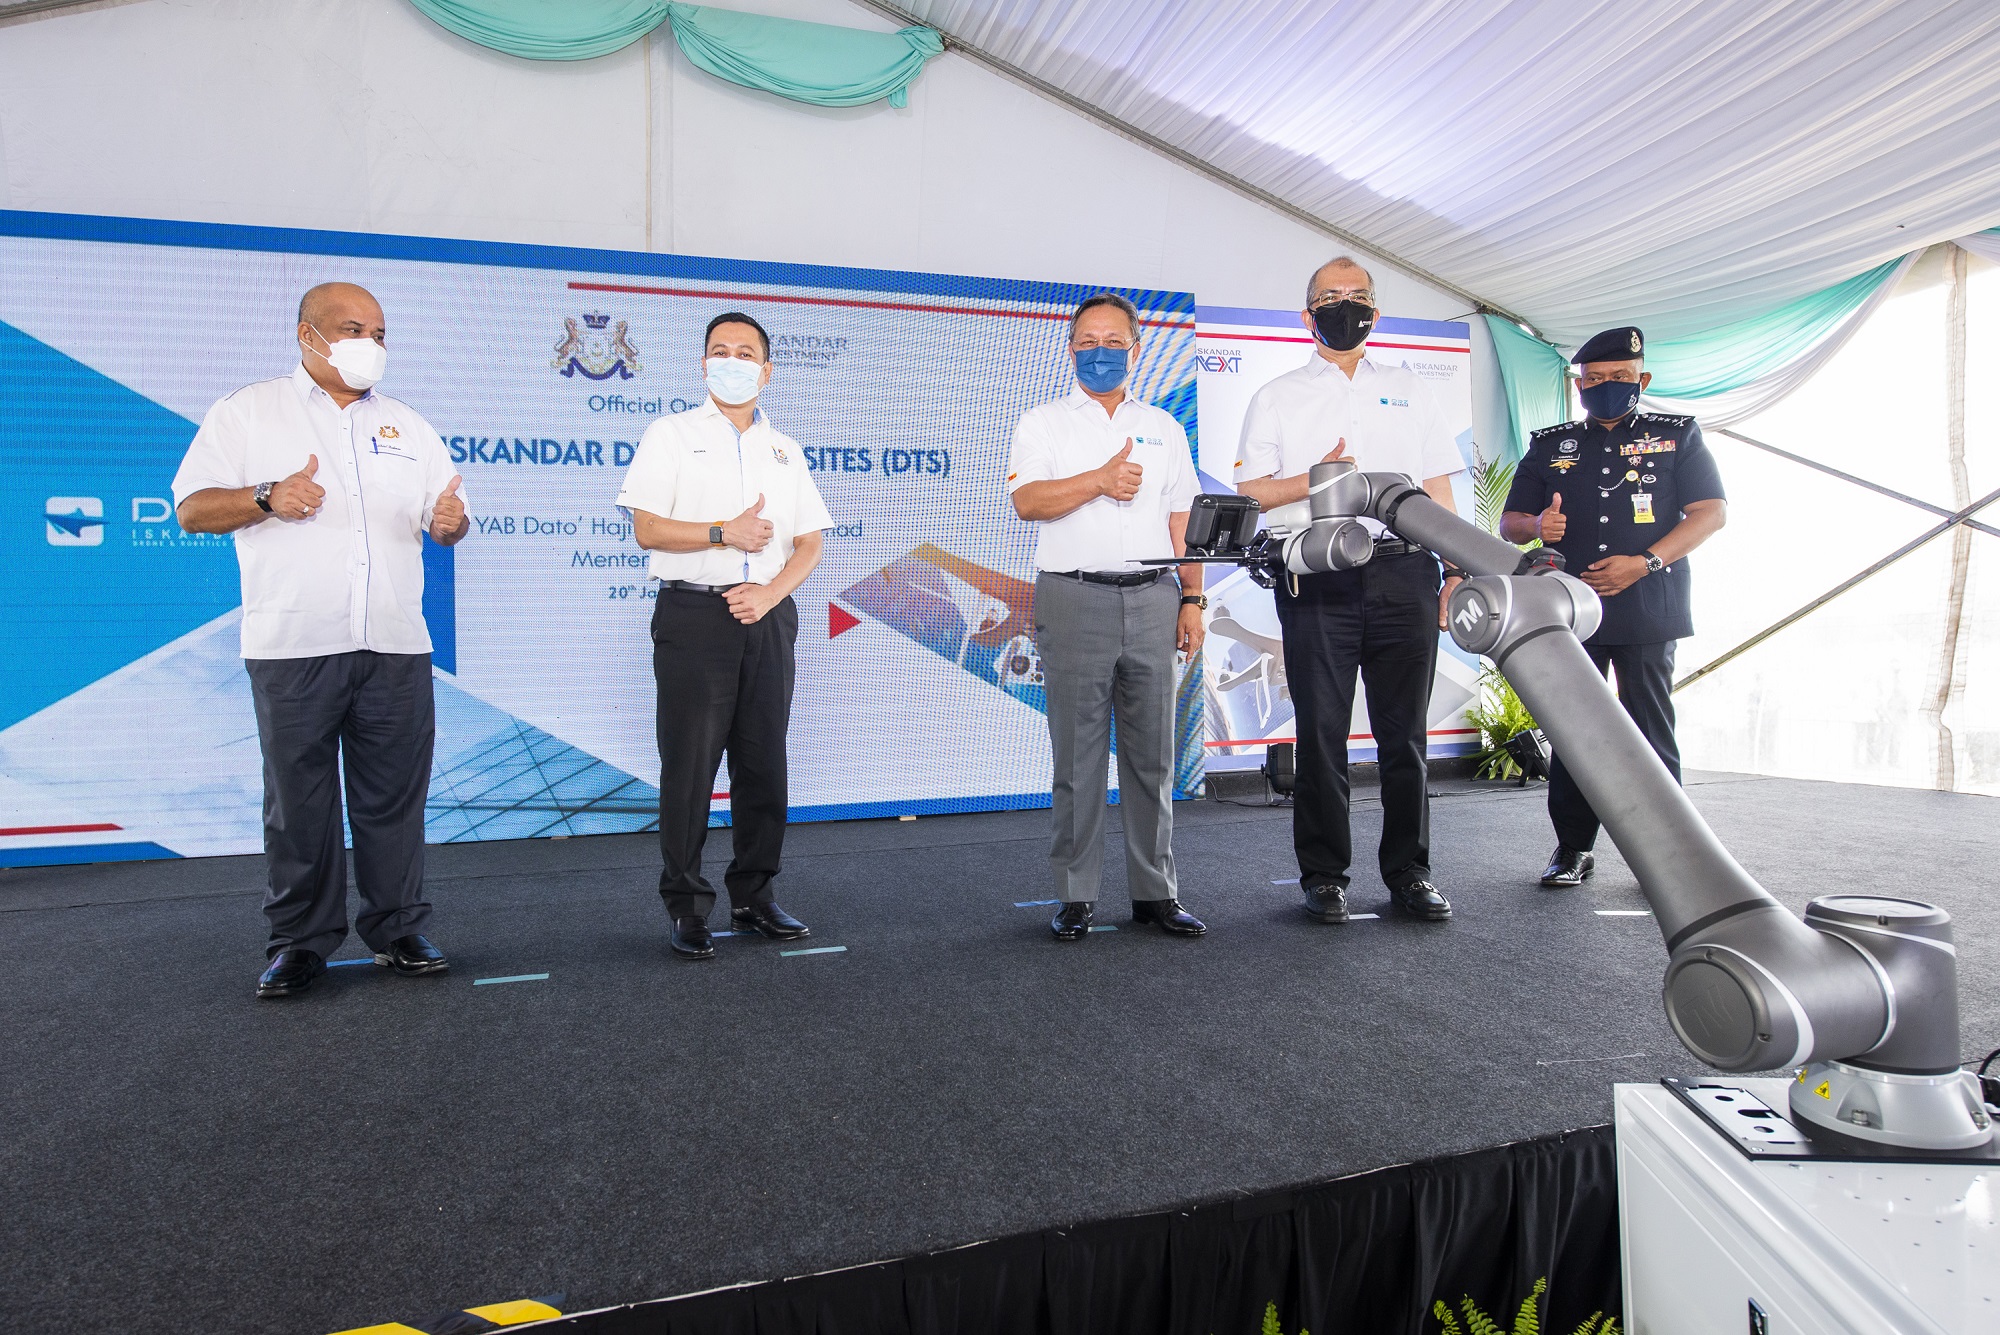 IIB opens Southeast Asia's largest drone test site in Medini